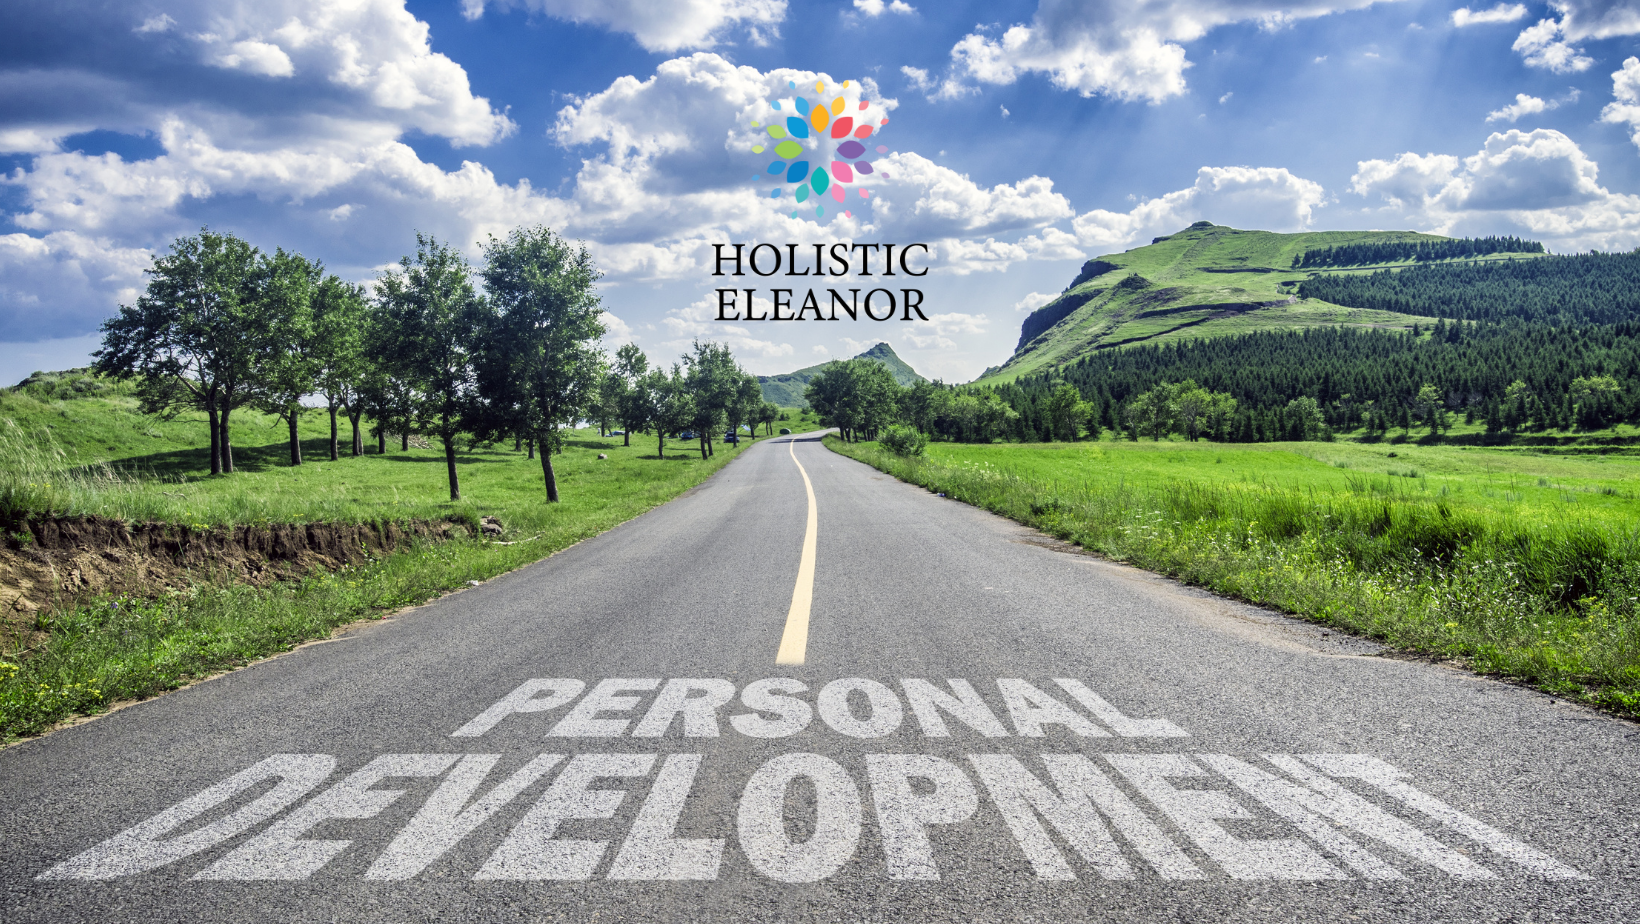 The Path of Personal Development, meme by Holistic Eleanor